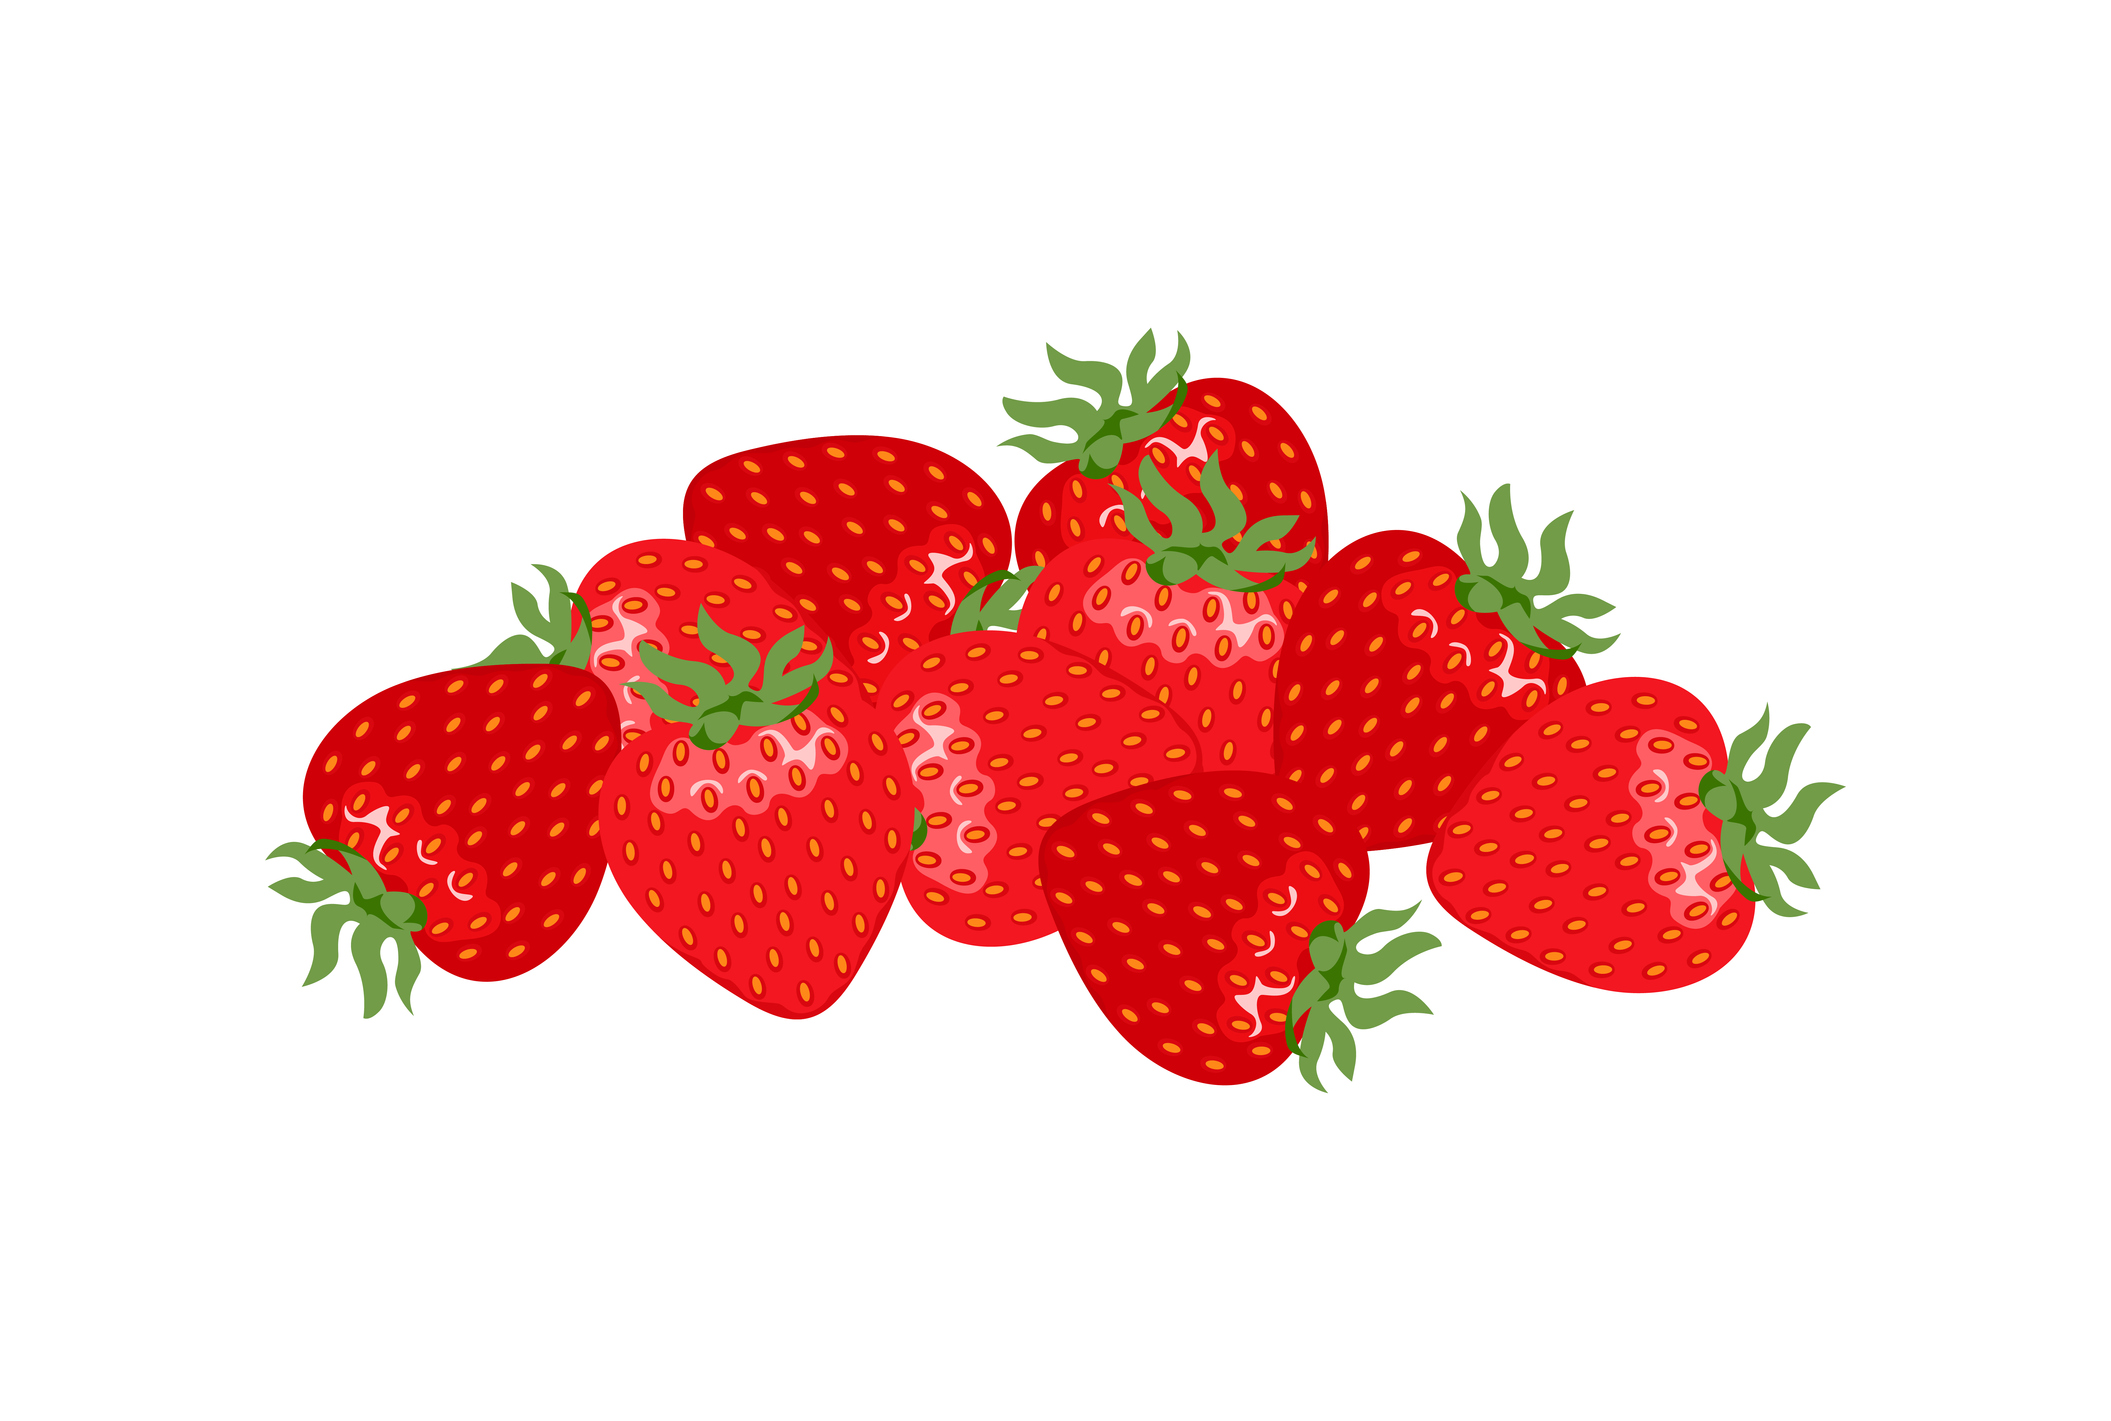 A heap of fresh red strawberries.